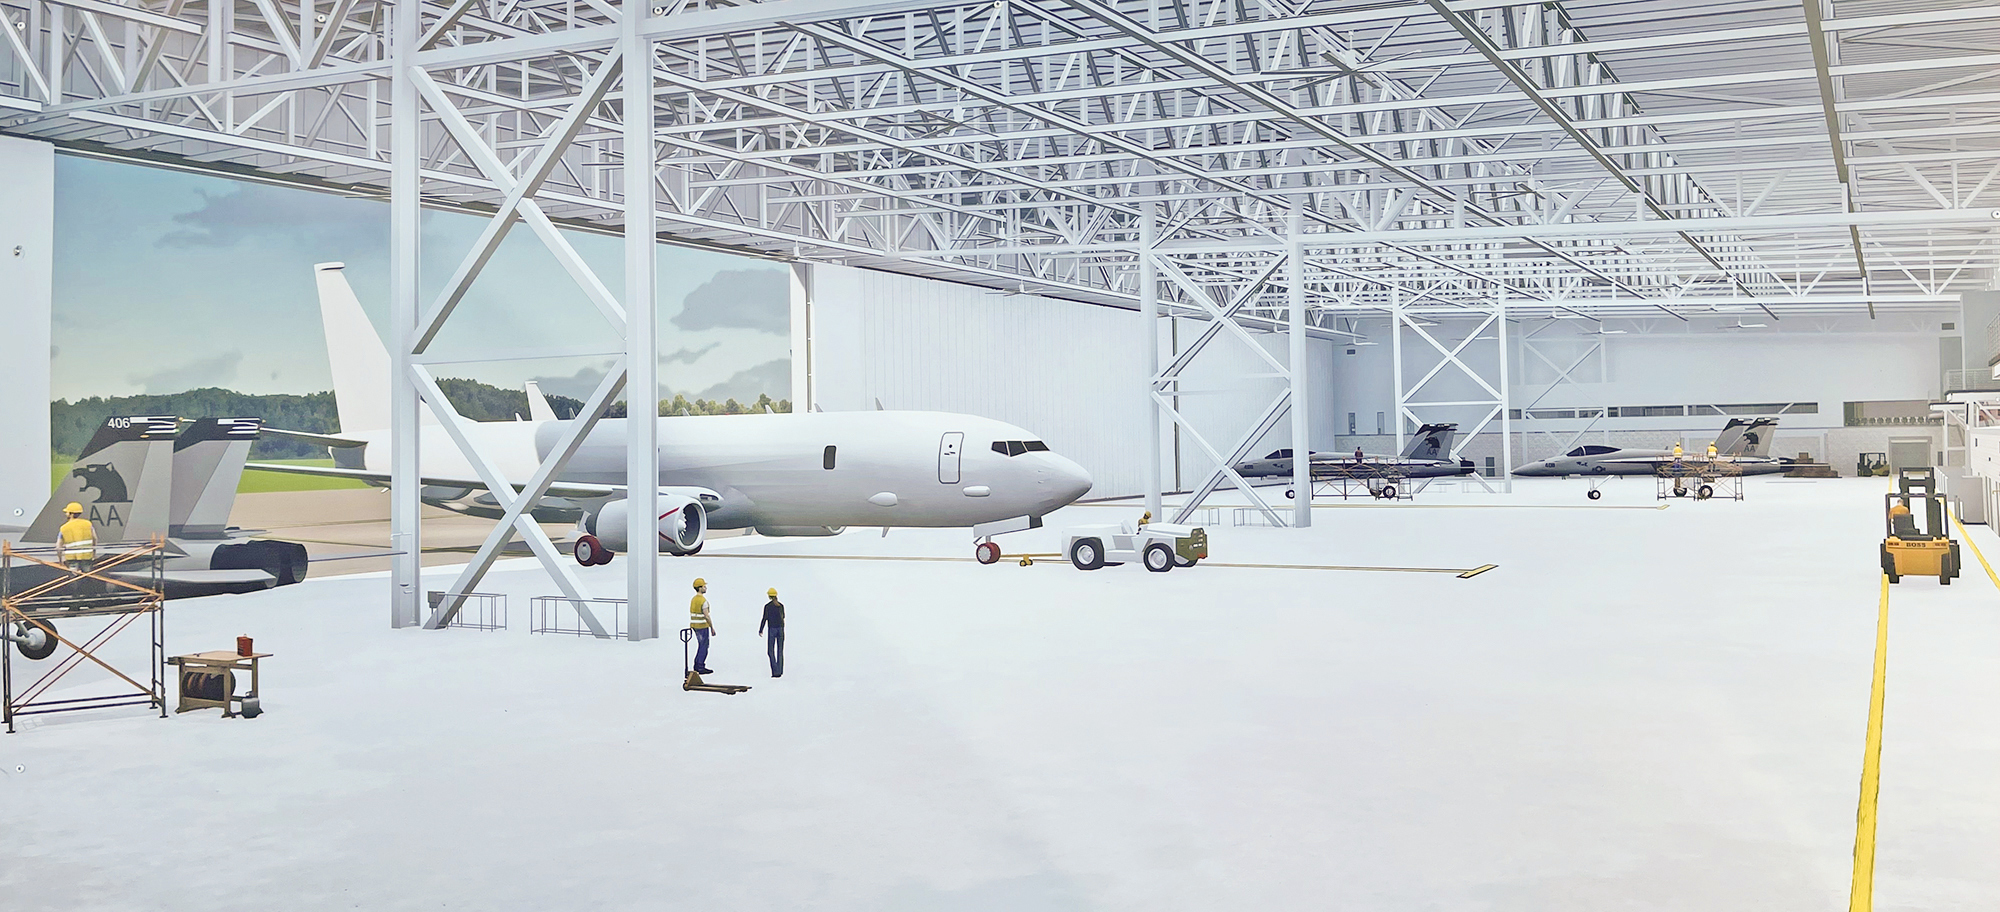 The 365,623-square-foot hangar has a construction cost of $101.9 million.